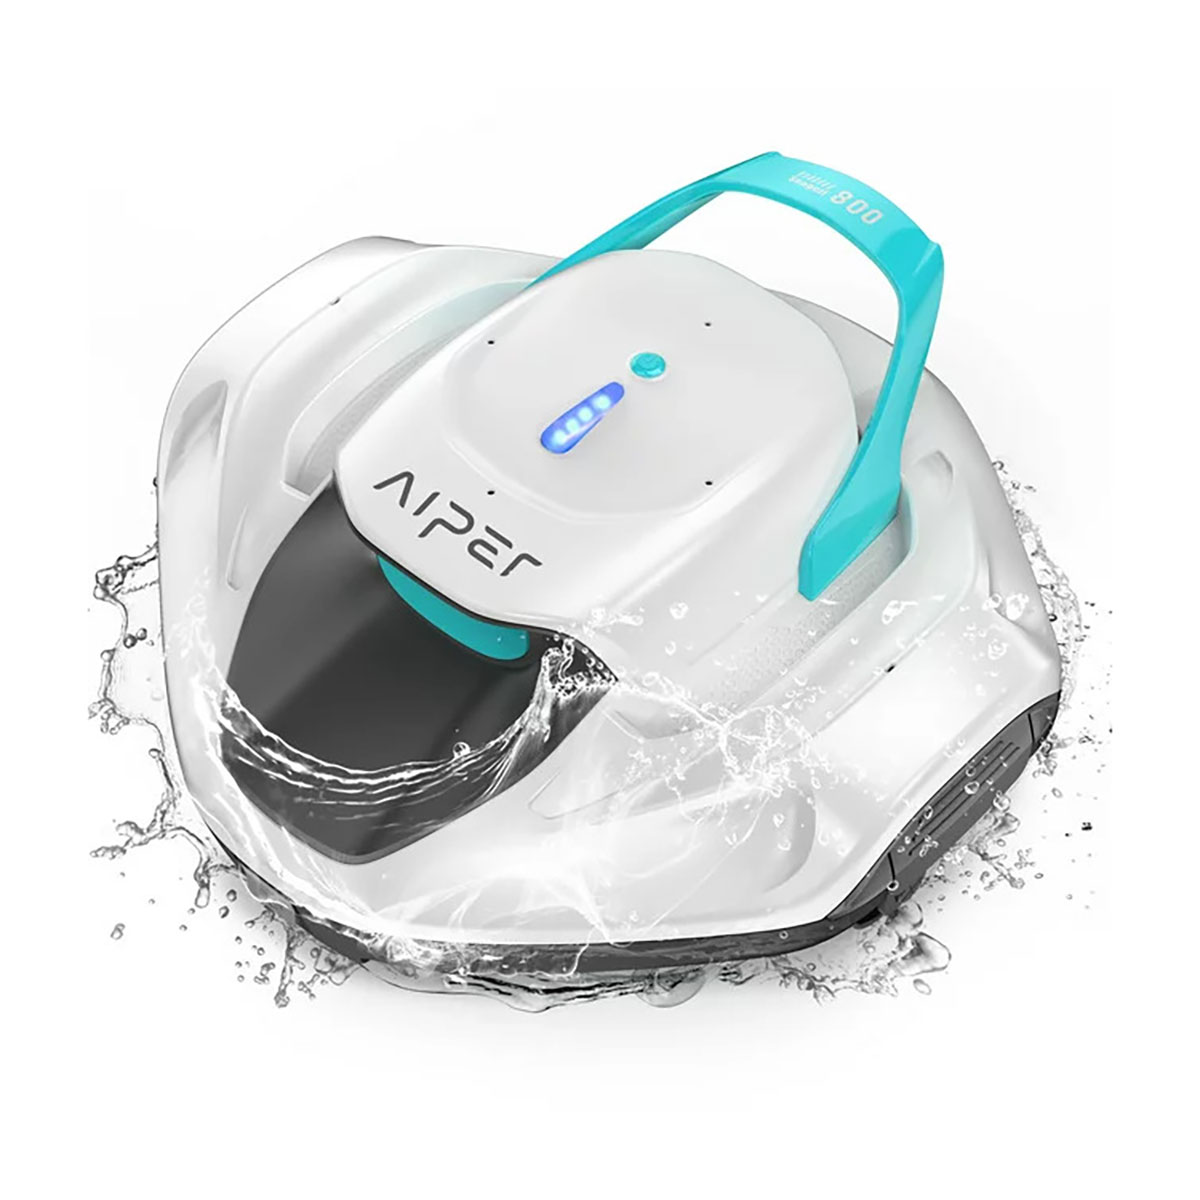 Aiper - SG800 Cordless Robotic Automatic Pool Cleaner